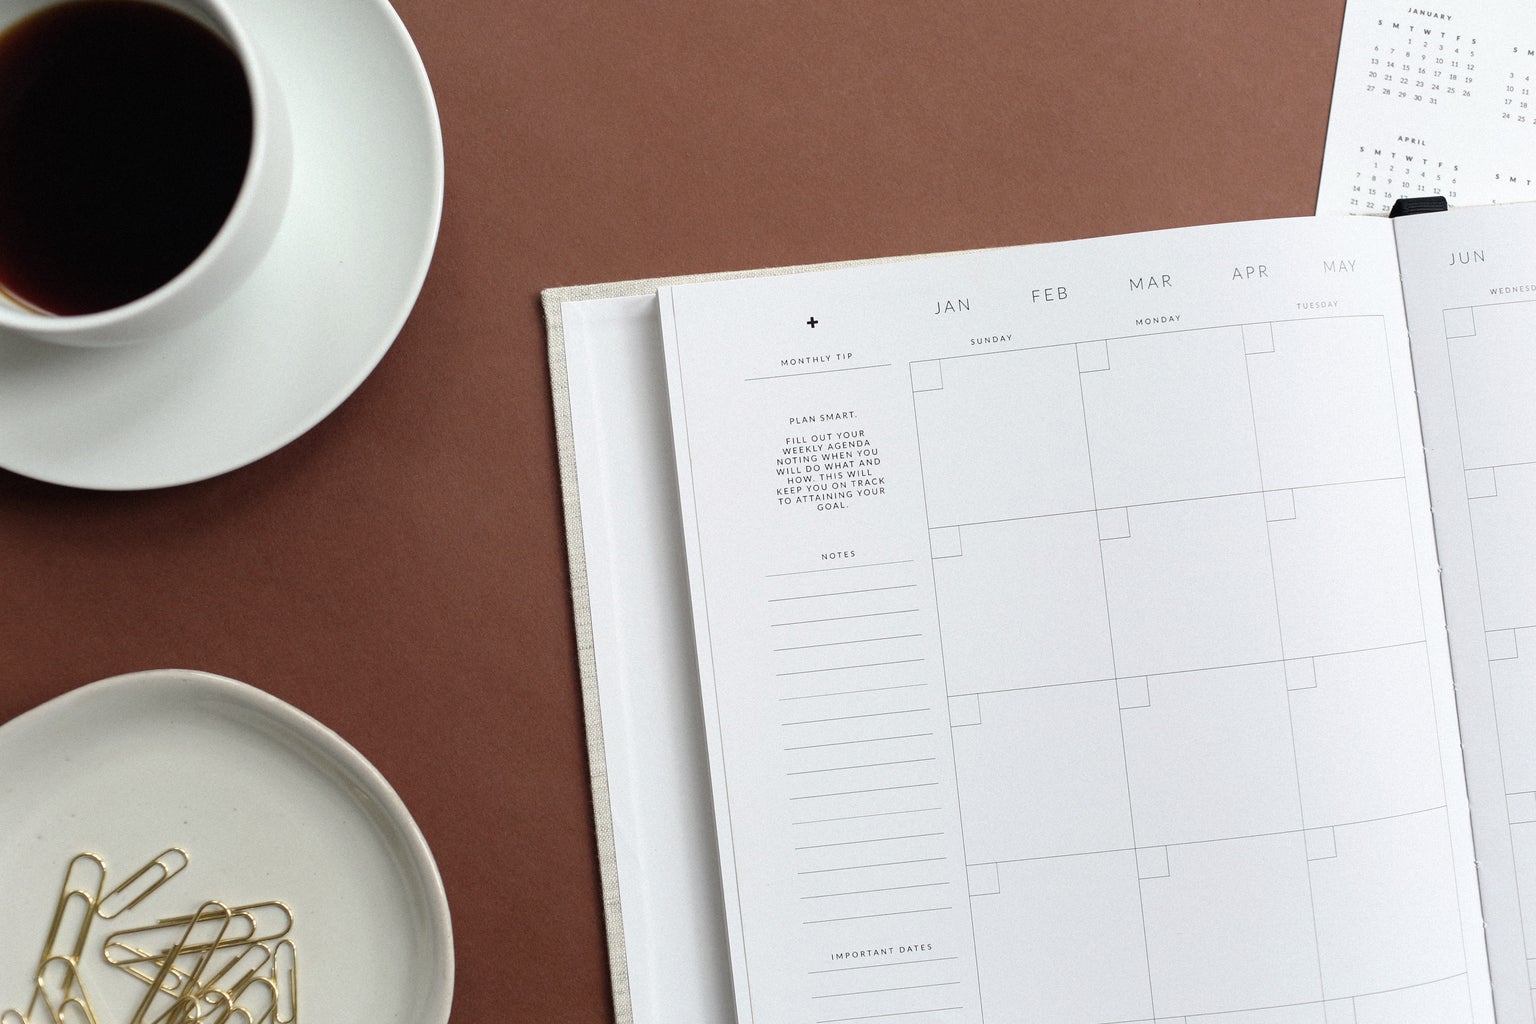 A blank open agenda on a table next to a full coffee mug on a plate and a plate filled with paperclips.